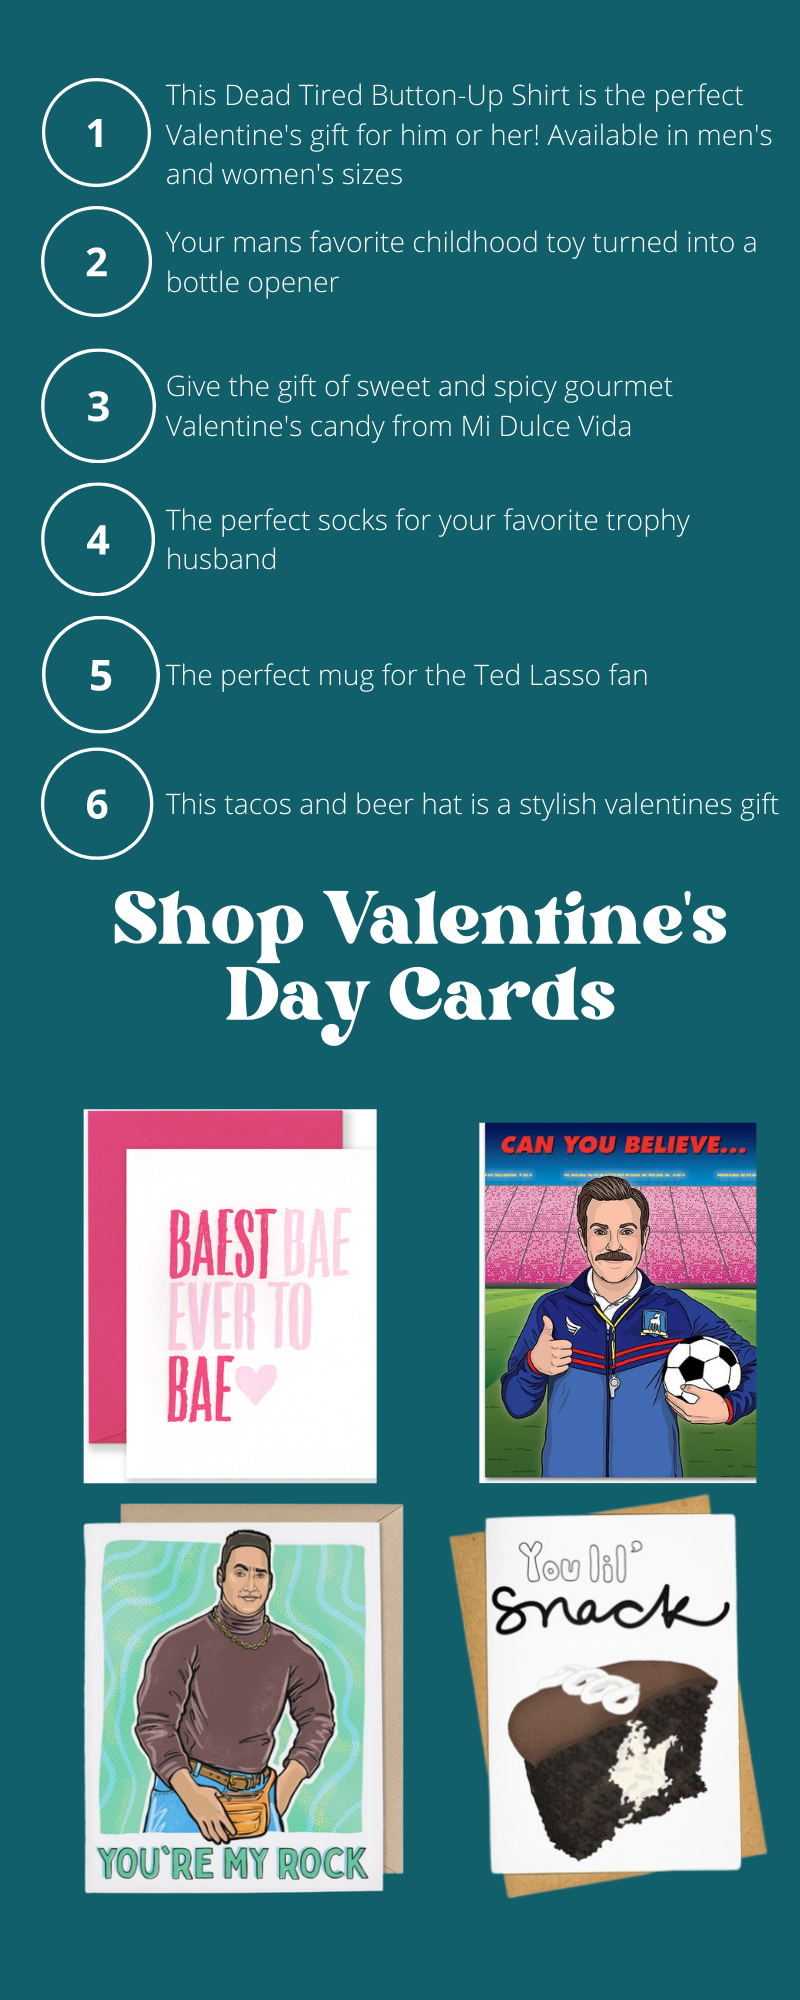 Valentine's Gifts for Him Descriptions